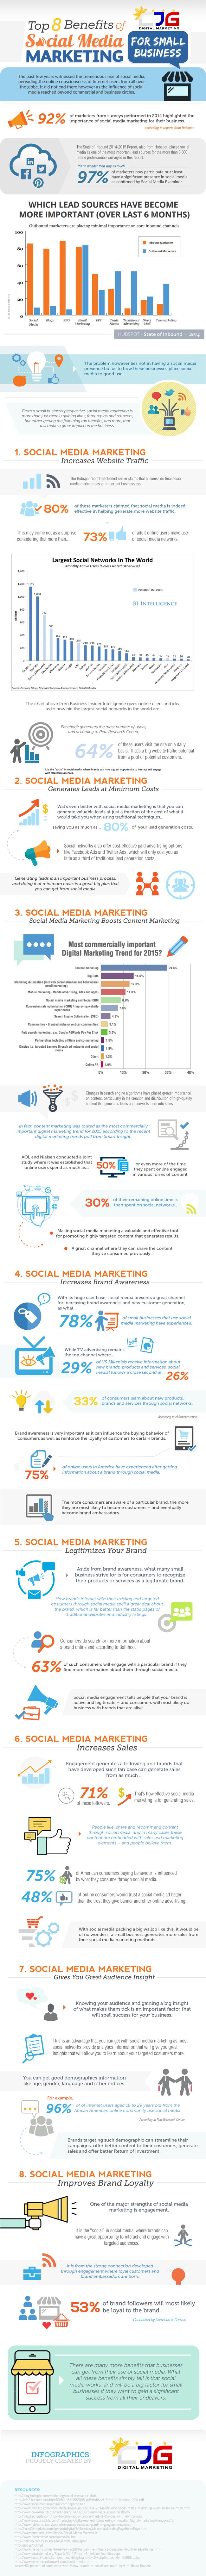 Top-8-Benefits-of-Social-Media-Marketing-for-Small-Business